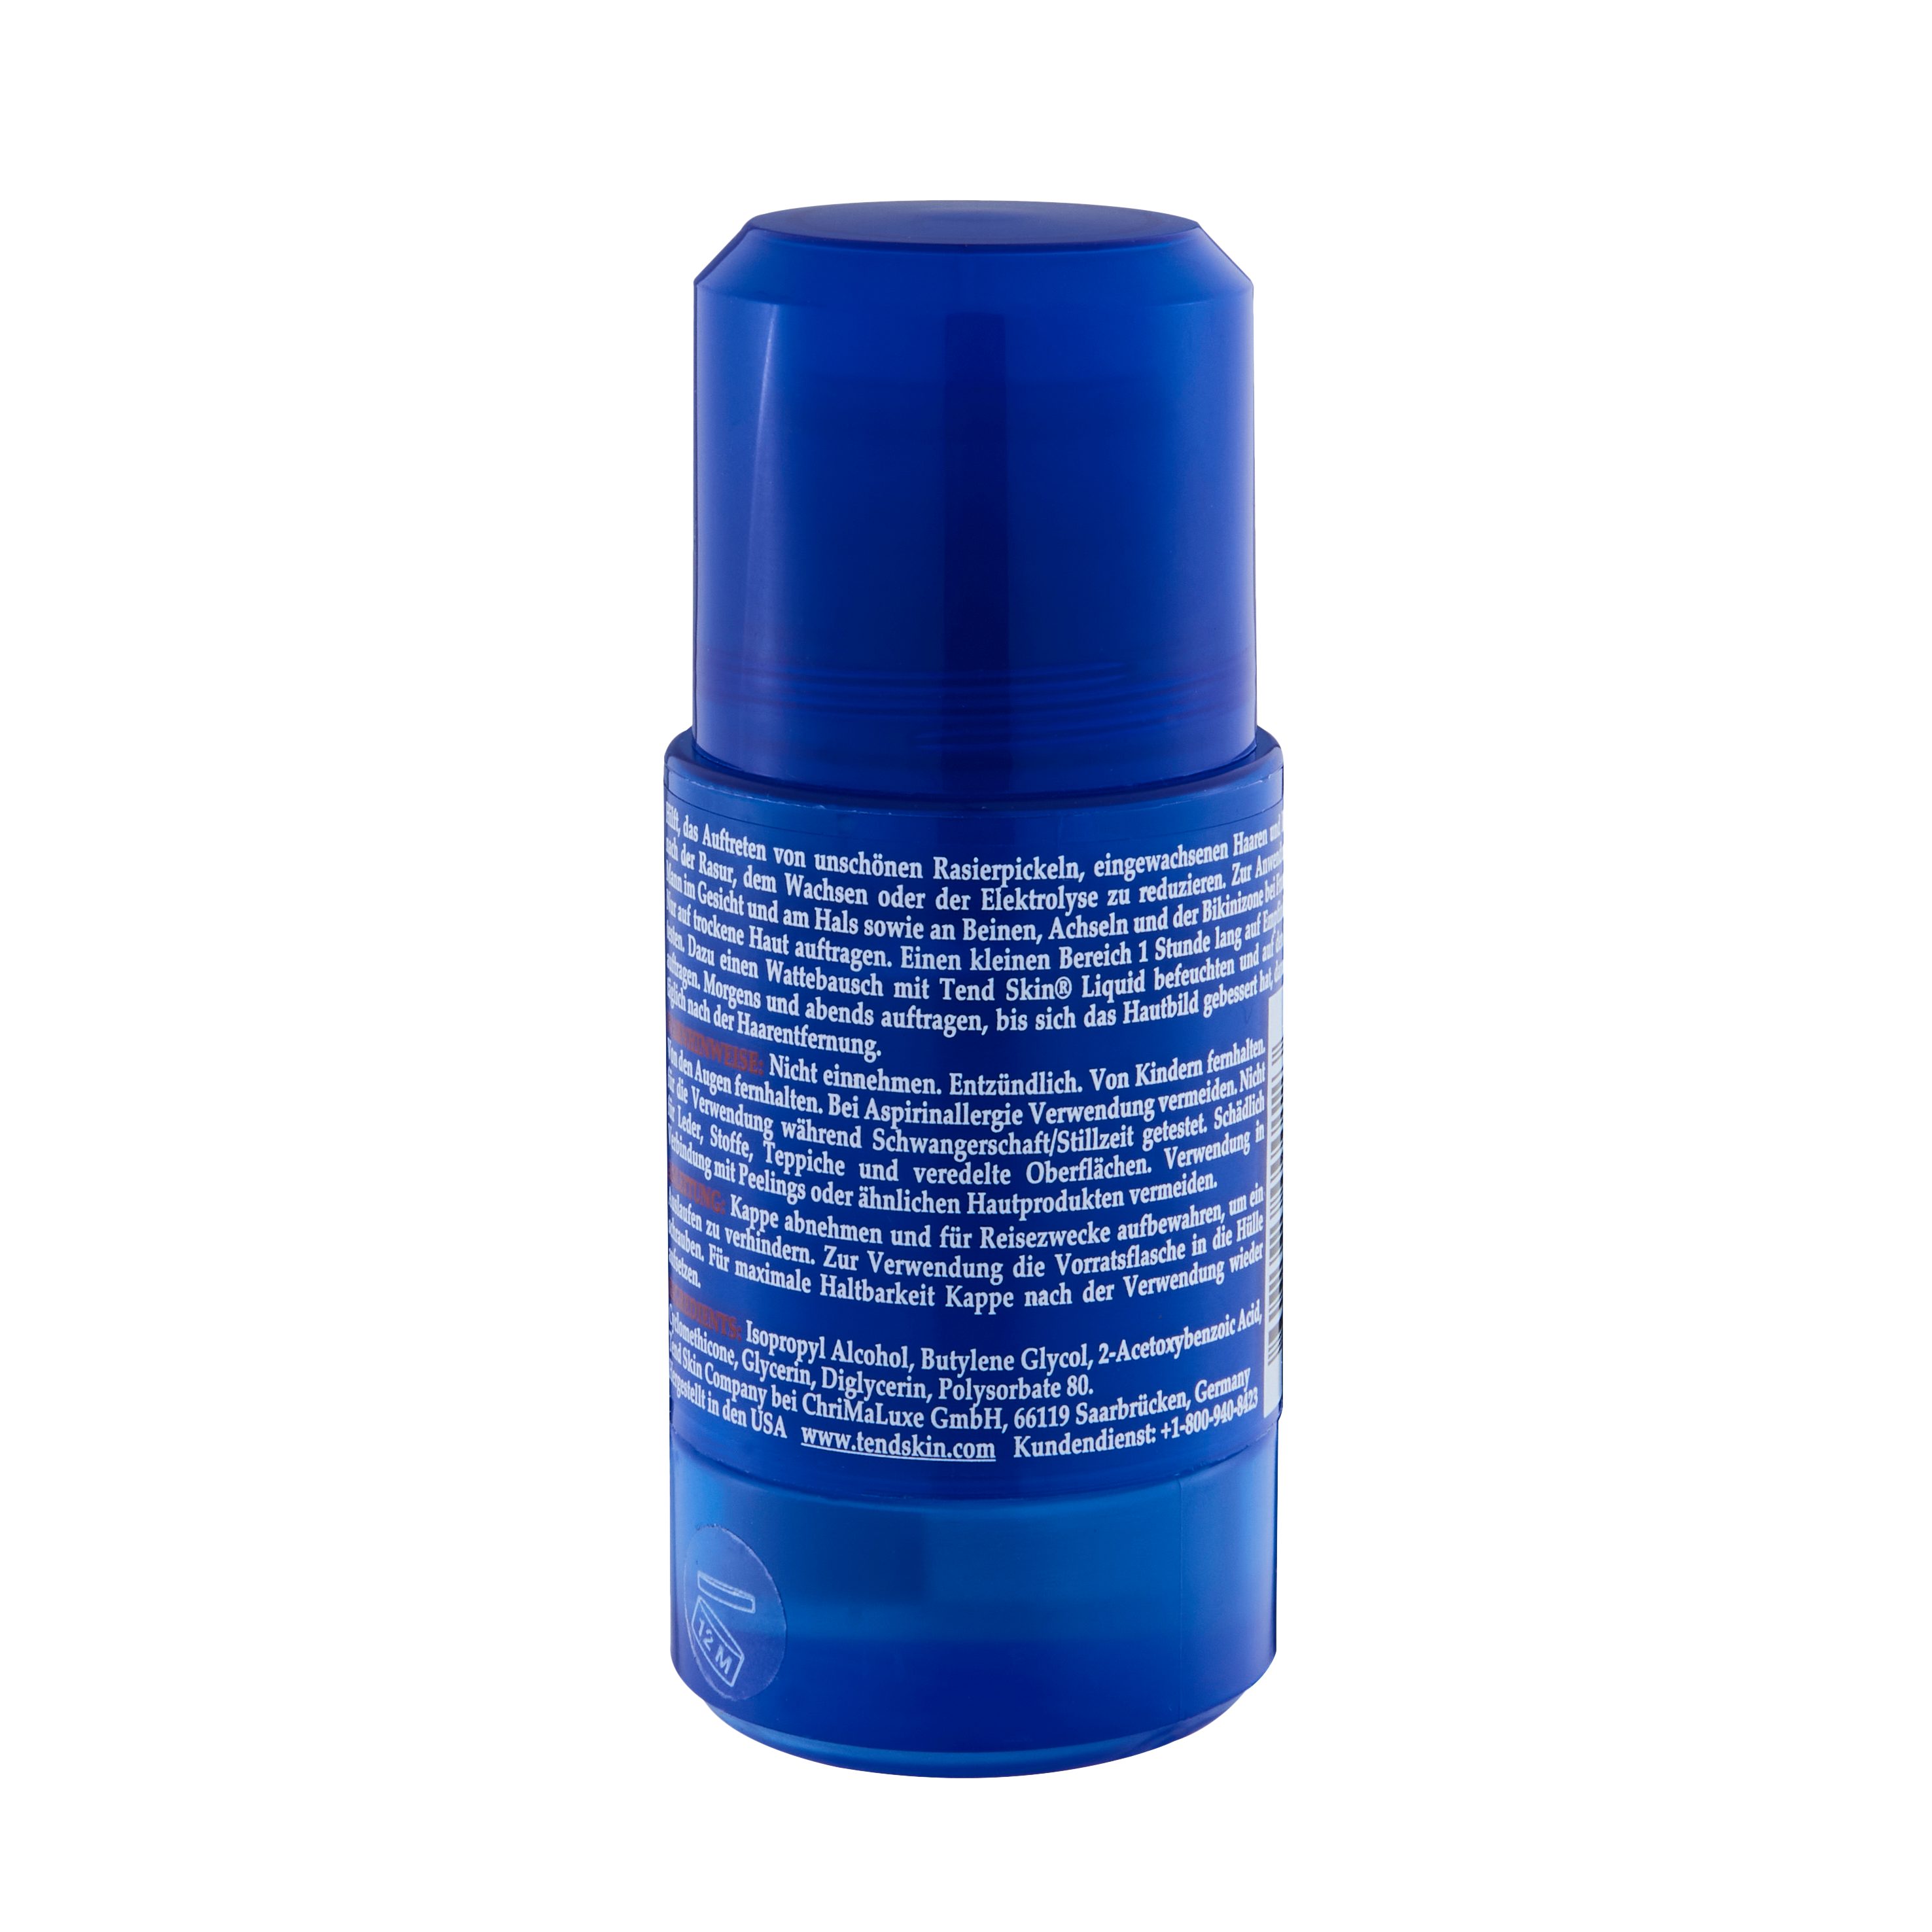 After-Shave Tend Roll-On Skin